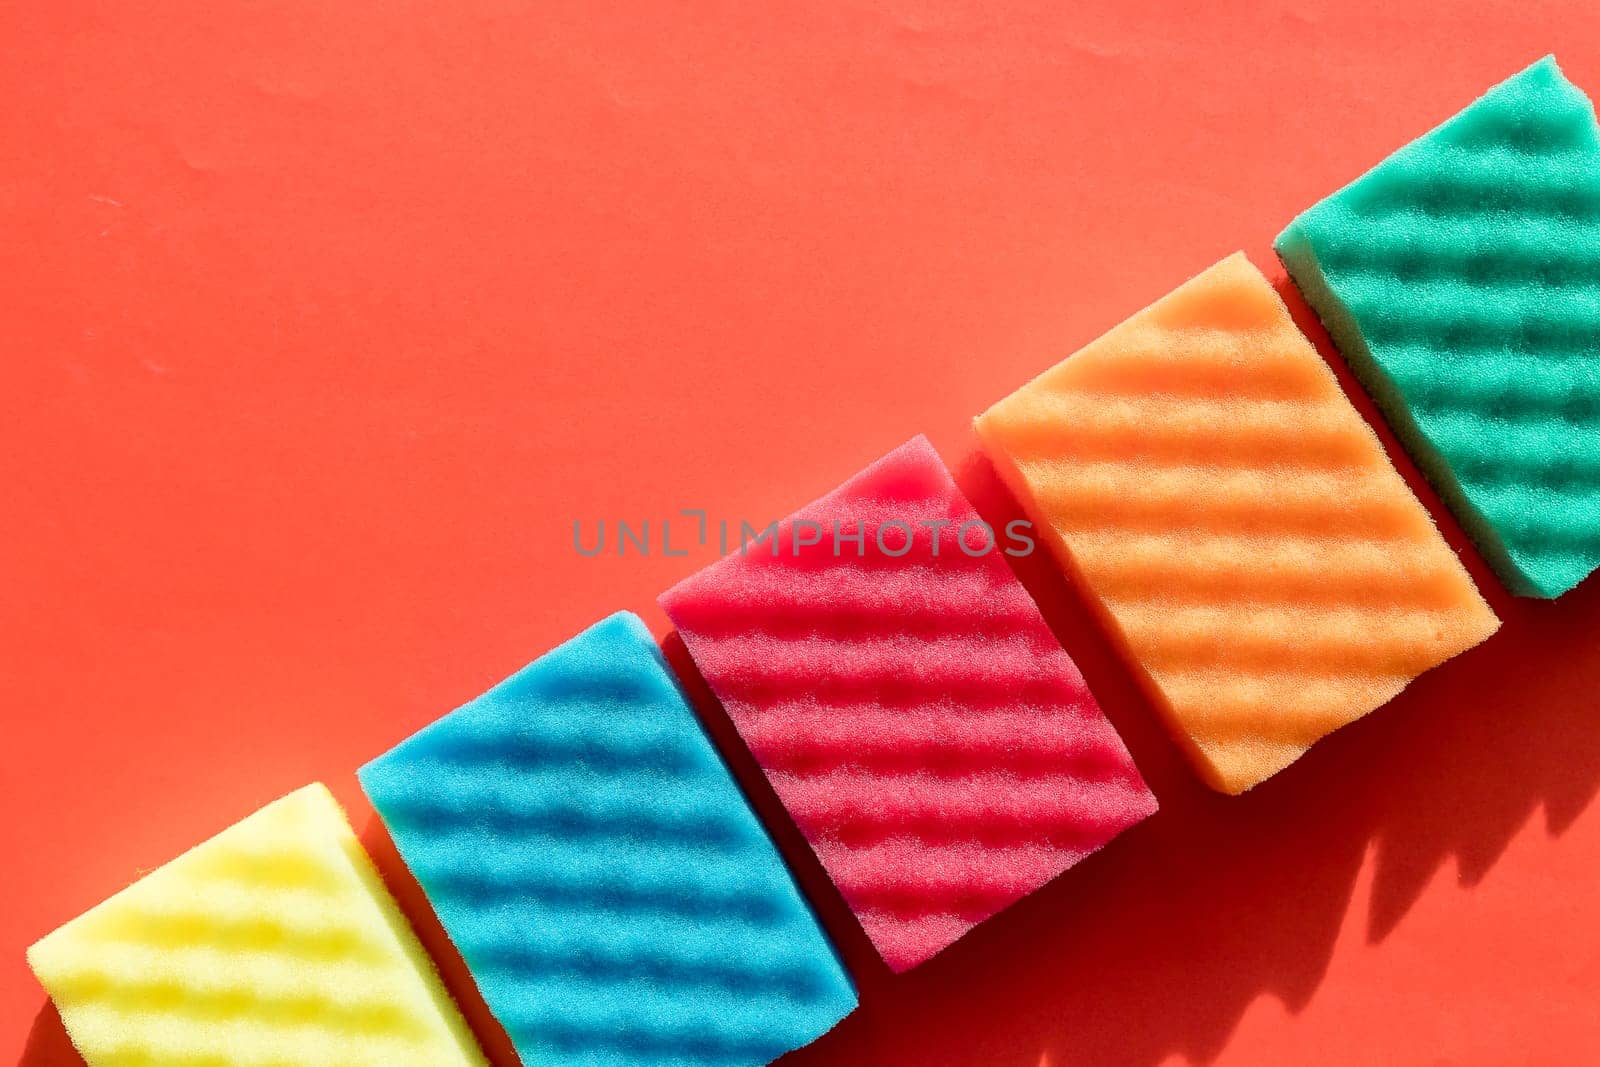 Brightly colored sponges on red background with copy space.cleanup day.sponges cleaning kit .House cleaning product.housework, housekeeping and household concept, cleaning stuff by YuliaYaspe1979